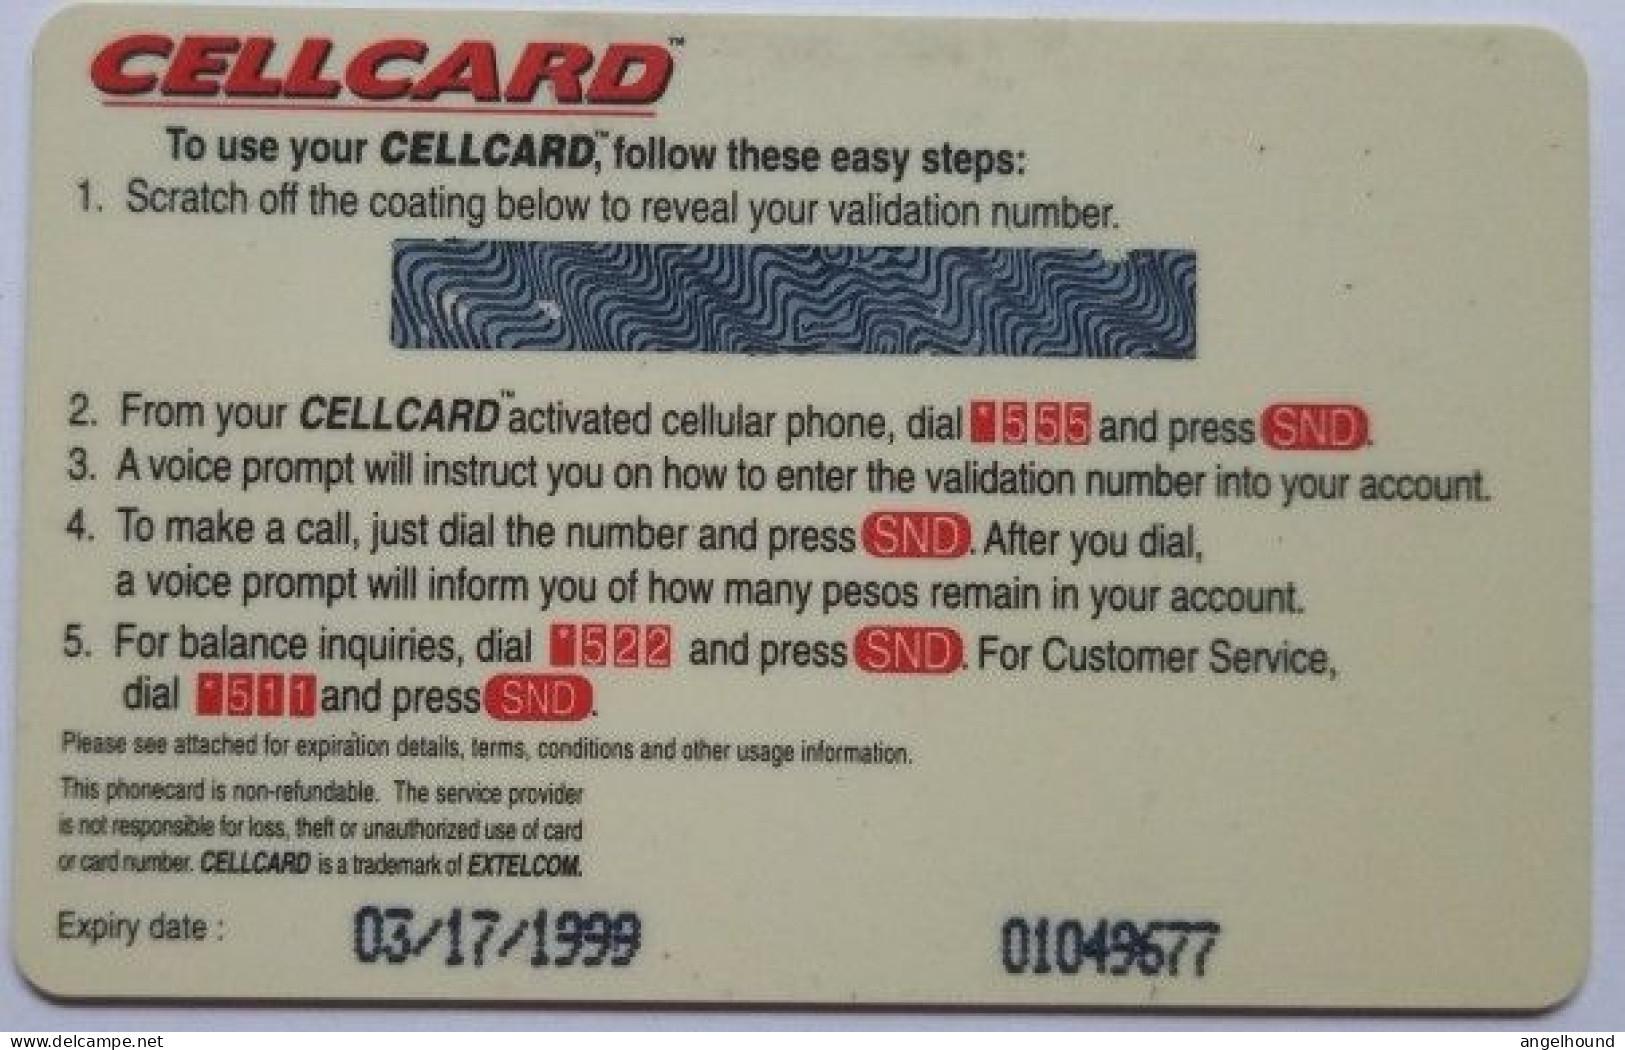 Philippines Extelcom Cellcard P500 MINT - Wow Wow Win - Philippines